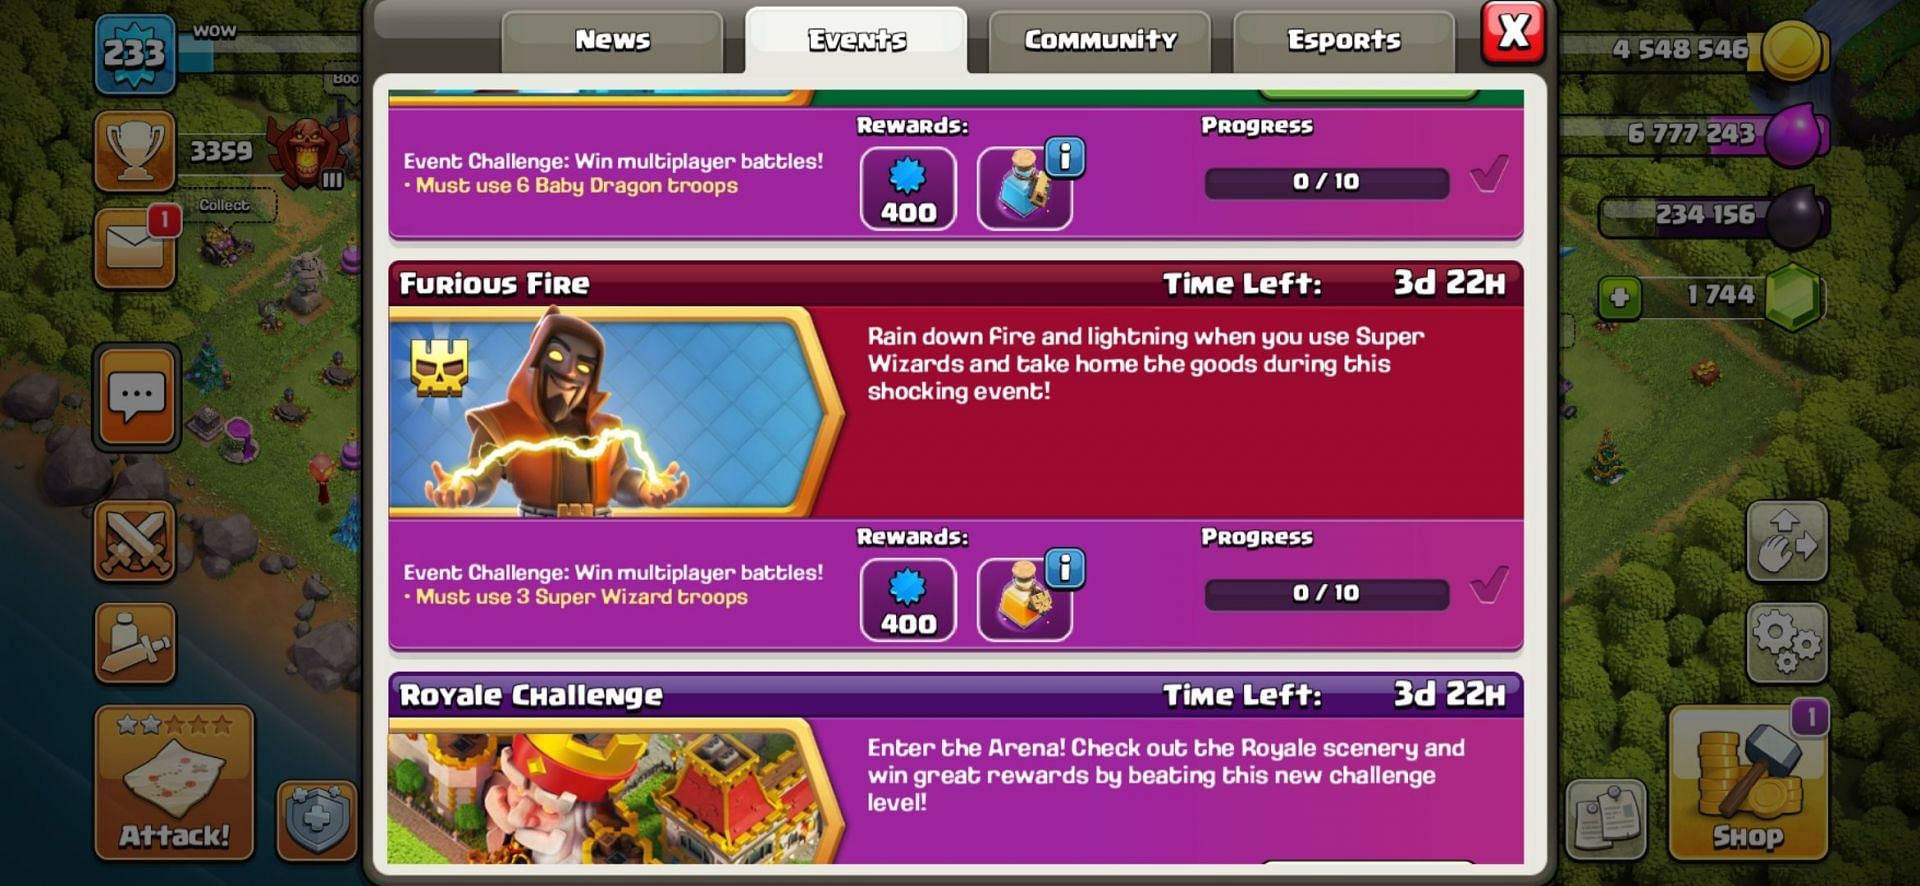 Events section in Clash of Clans (Image via Sportskeeda)